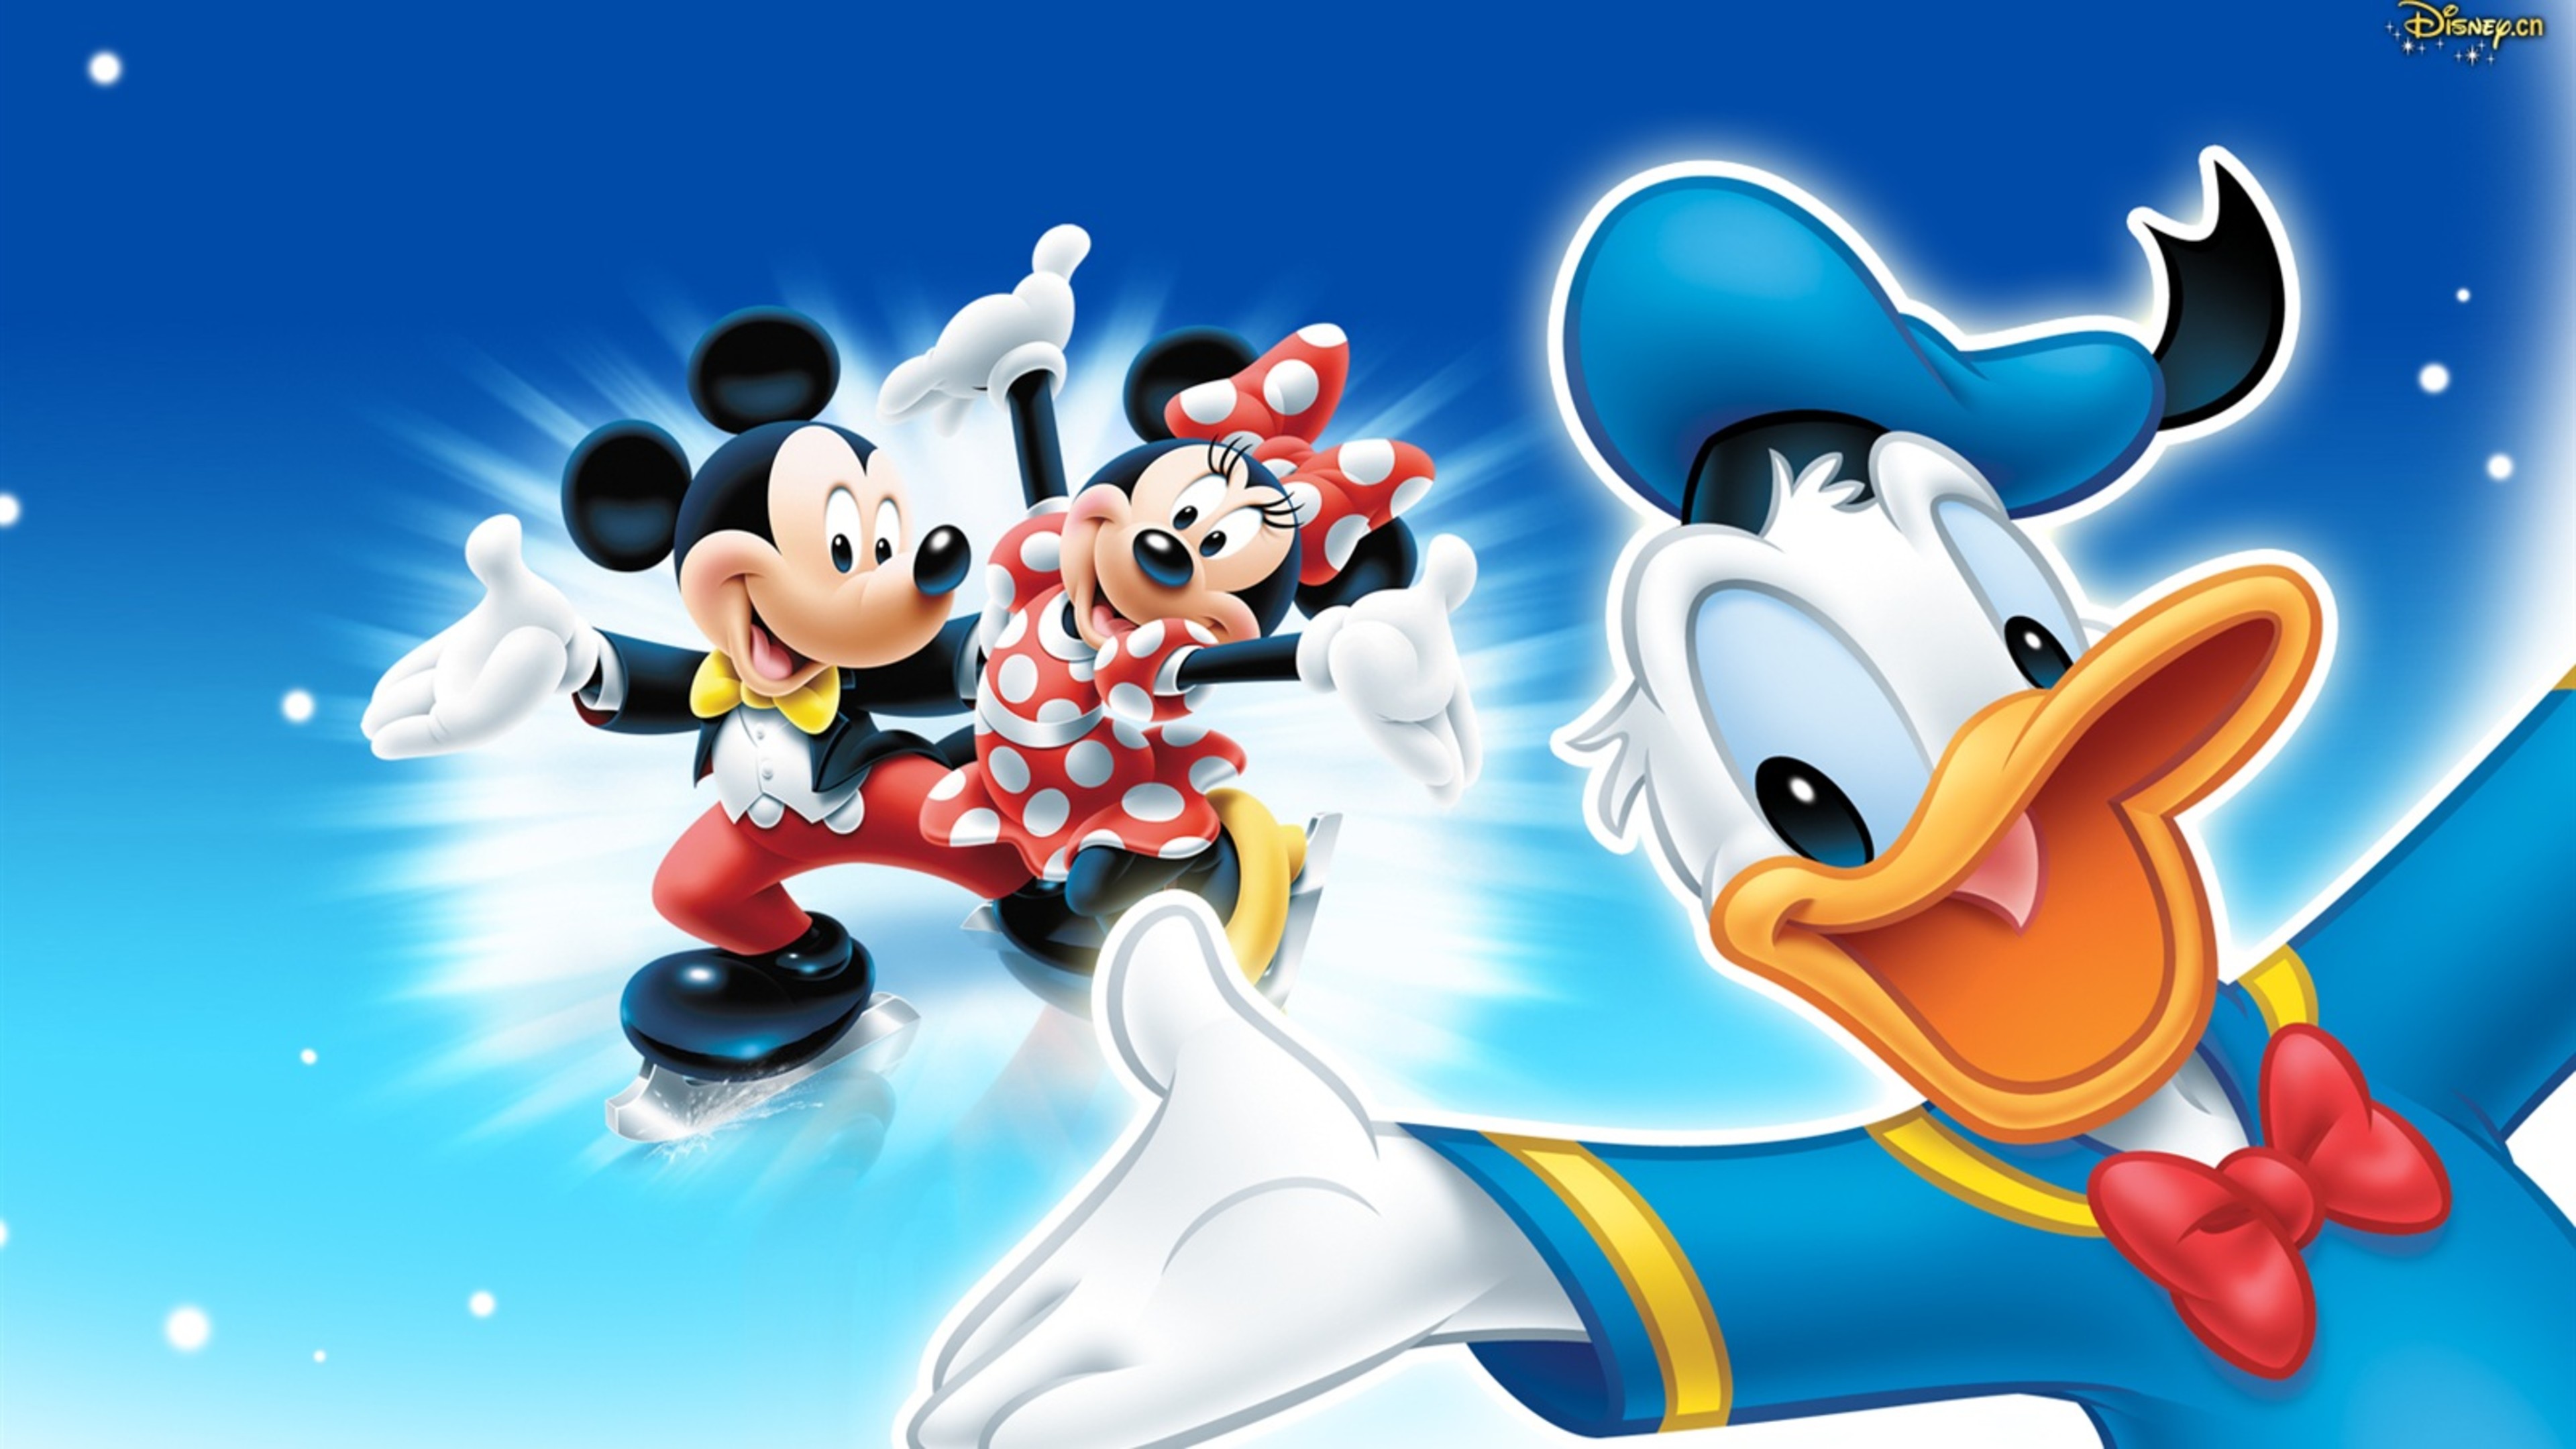 Donald Duck Mickey And Minnie Mouse Cartoons Hd Wallpaper For Mobile